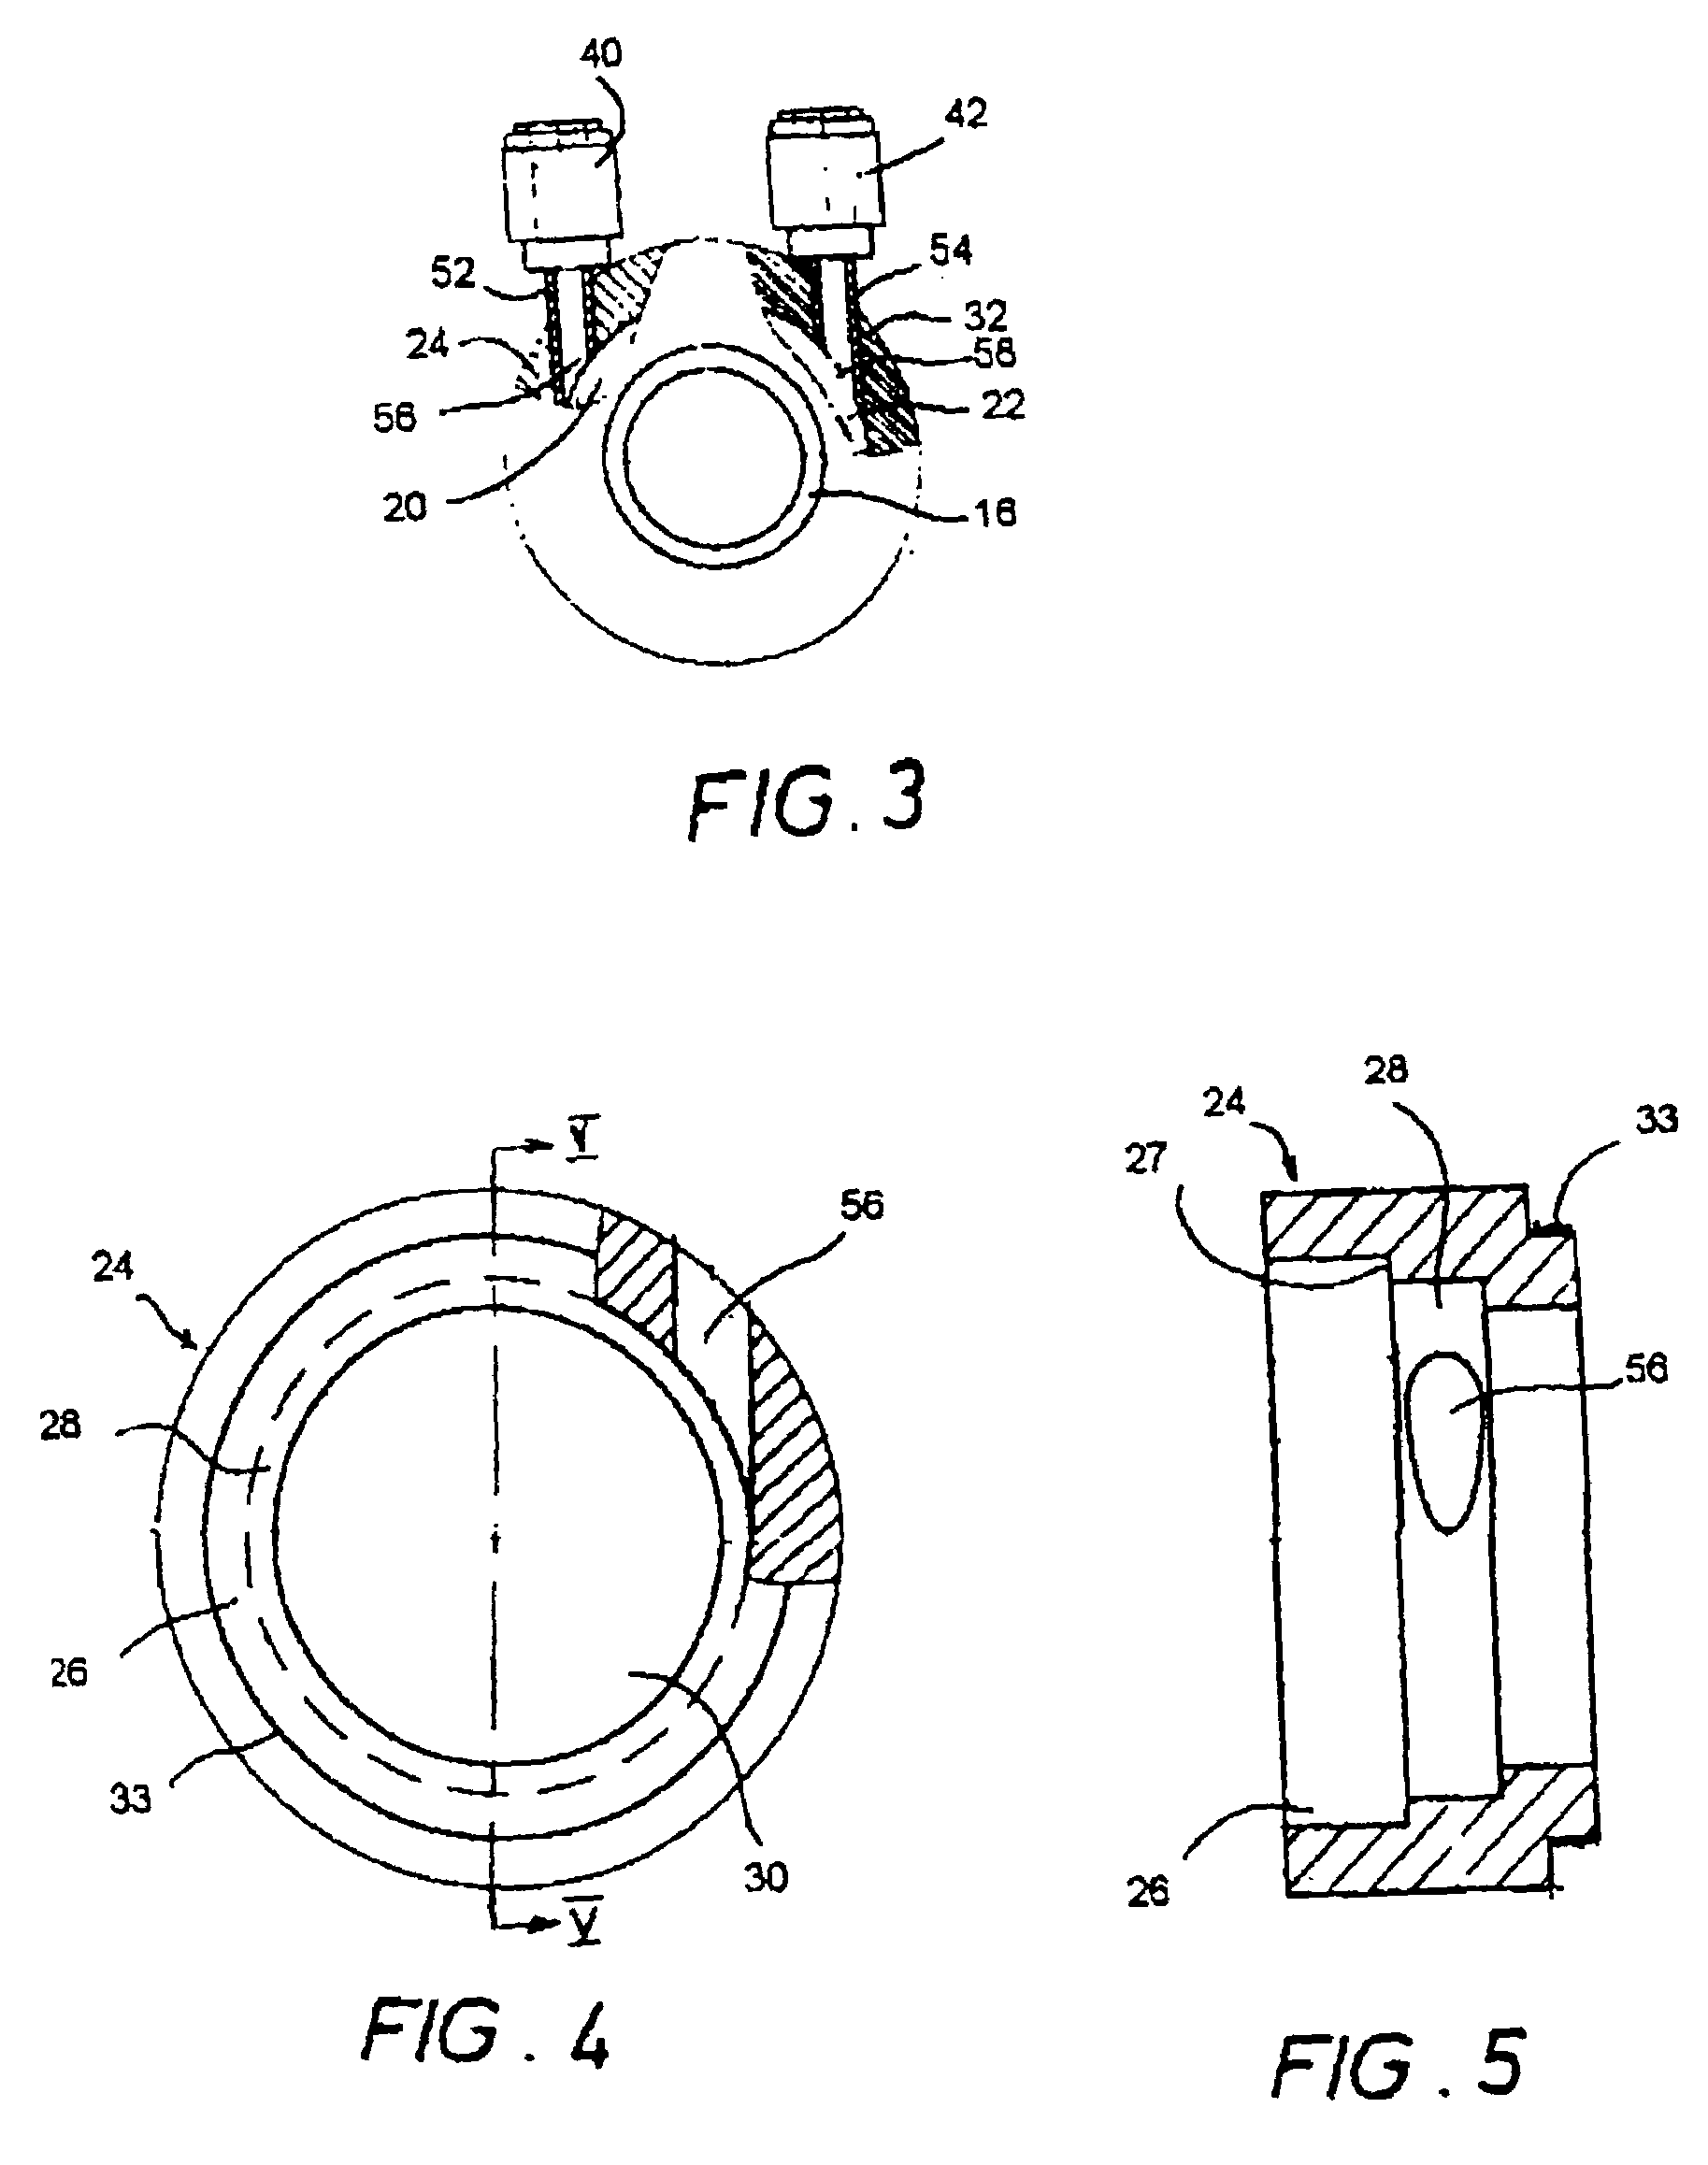 Method and apparatus for making electrolyzed water